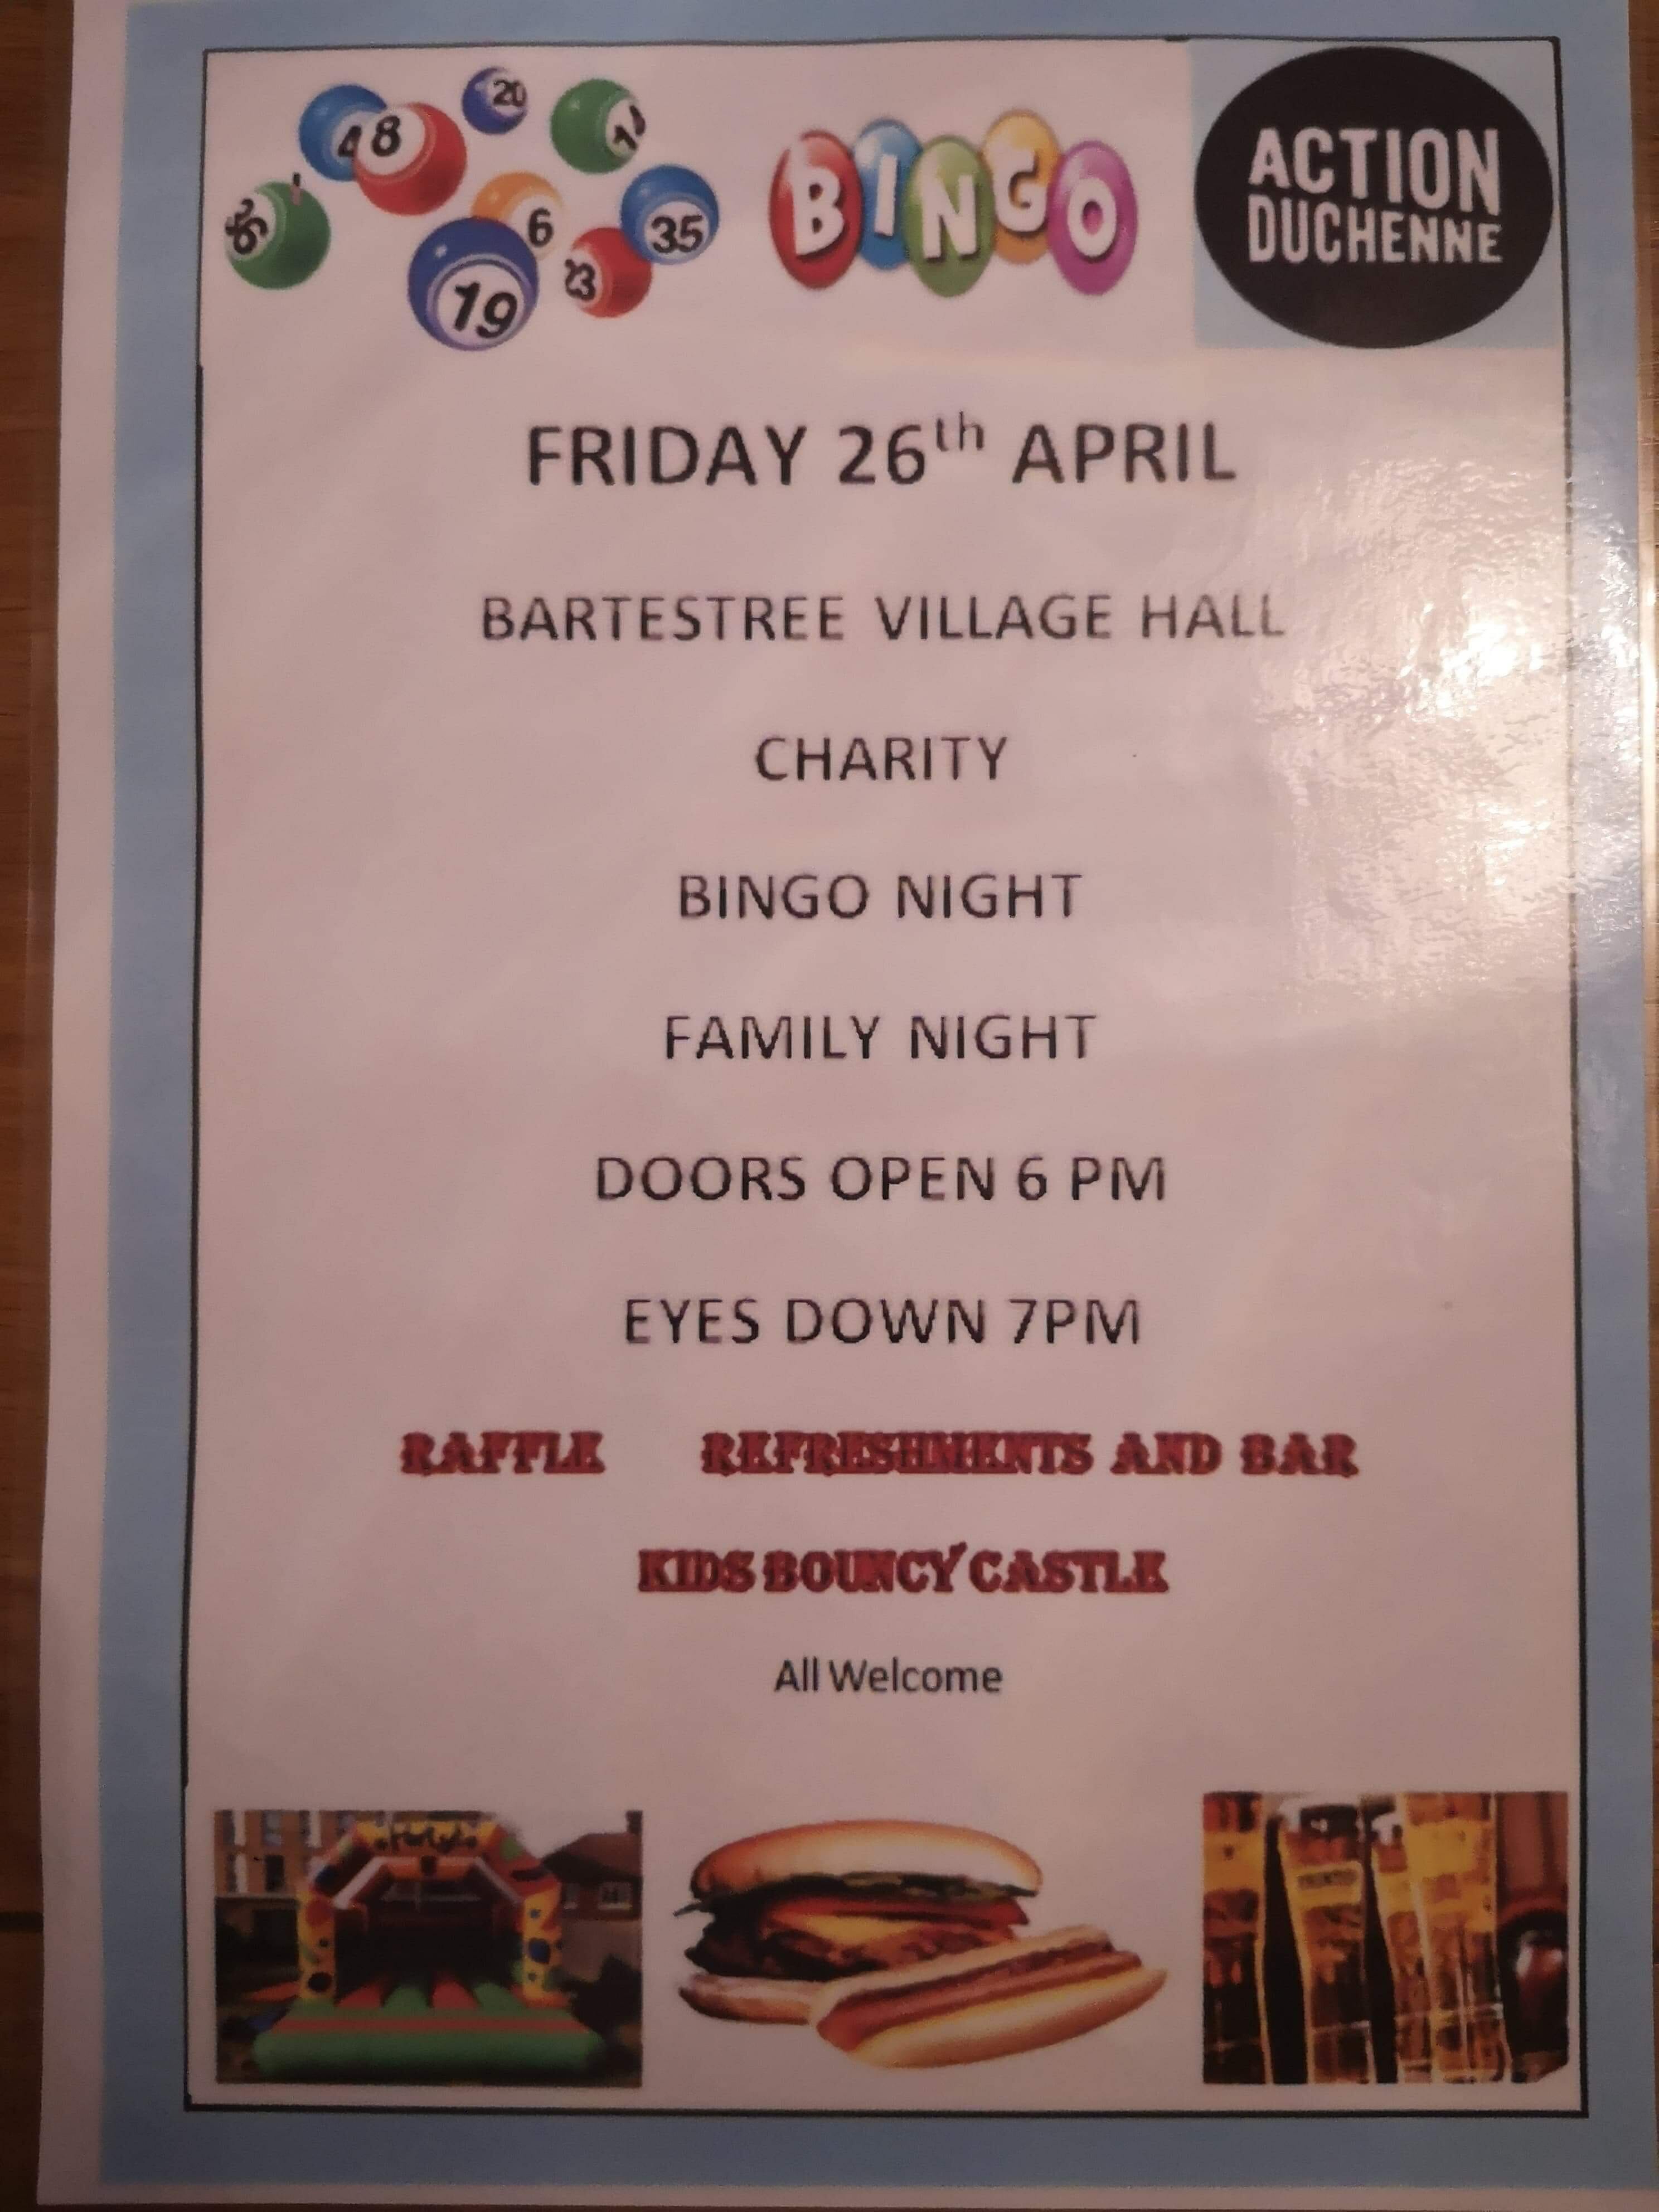 CHARITY | Charity Bingo Night in aid of Action Duchenne at Bartestree Village Hall.